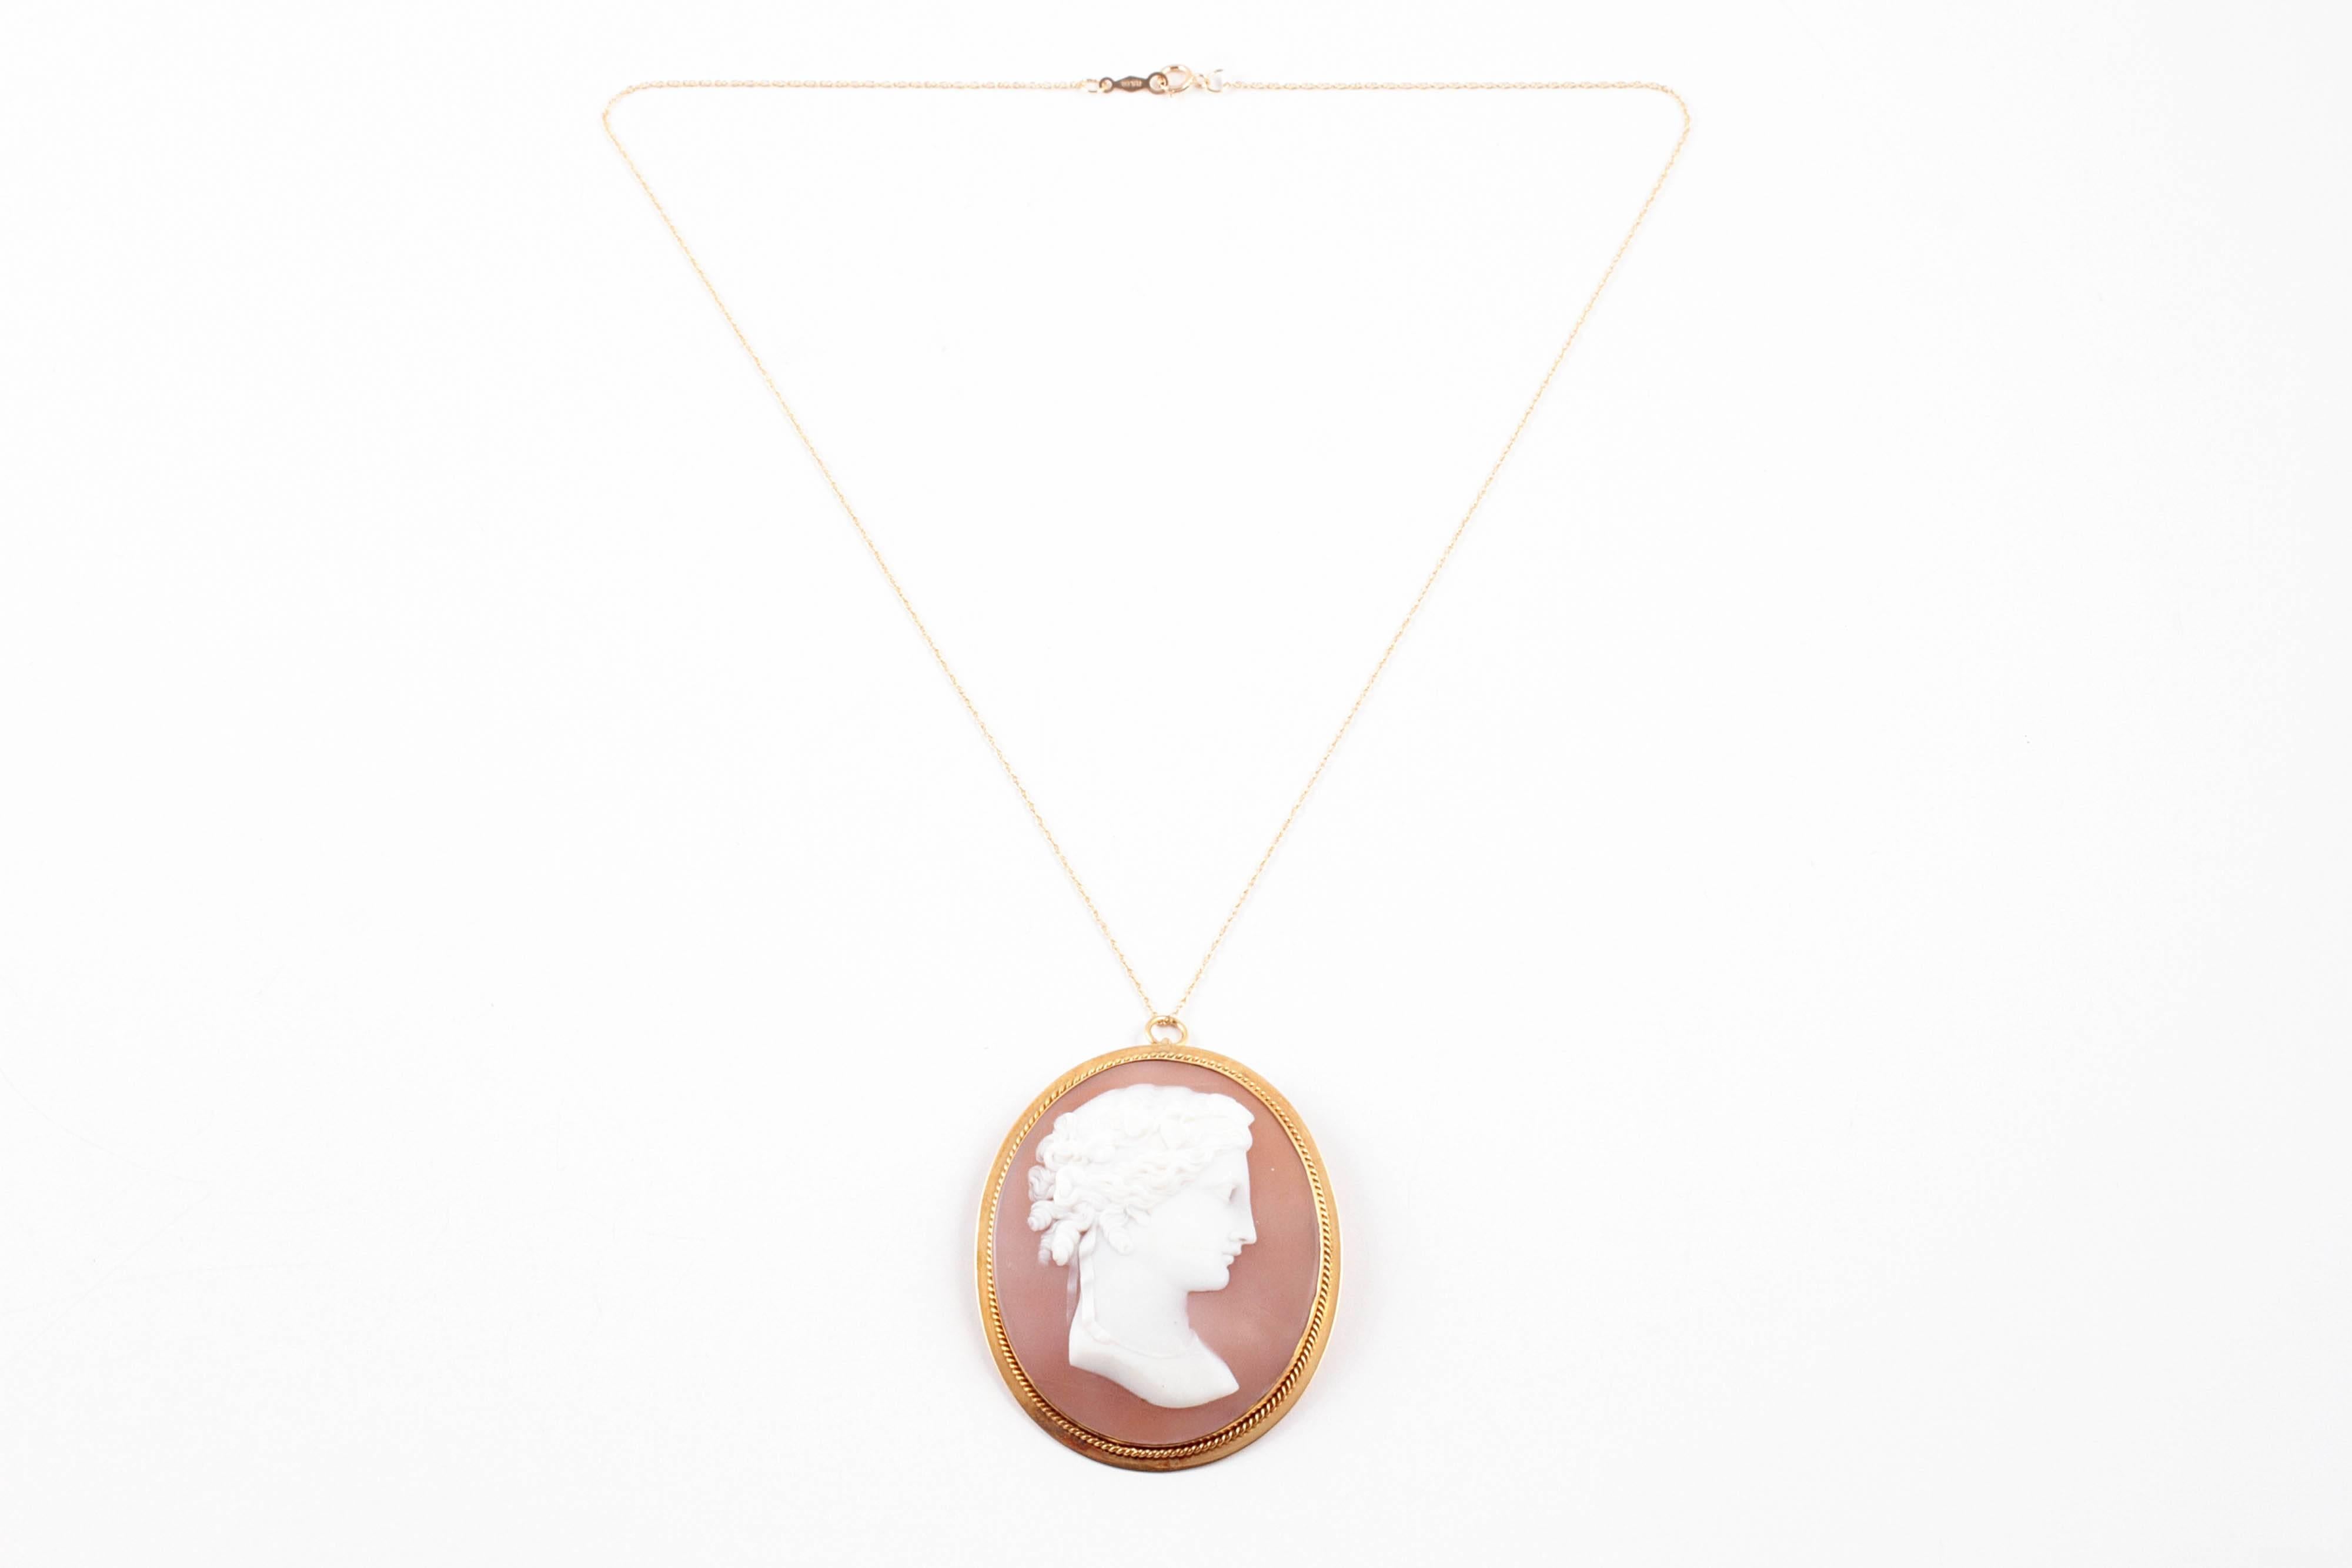 Early Twentieth Century shell cameo in an elegant gold frame.  The cameo is suspended on a yellow gold filled 18 inch chain and can also be worn as a brooch.